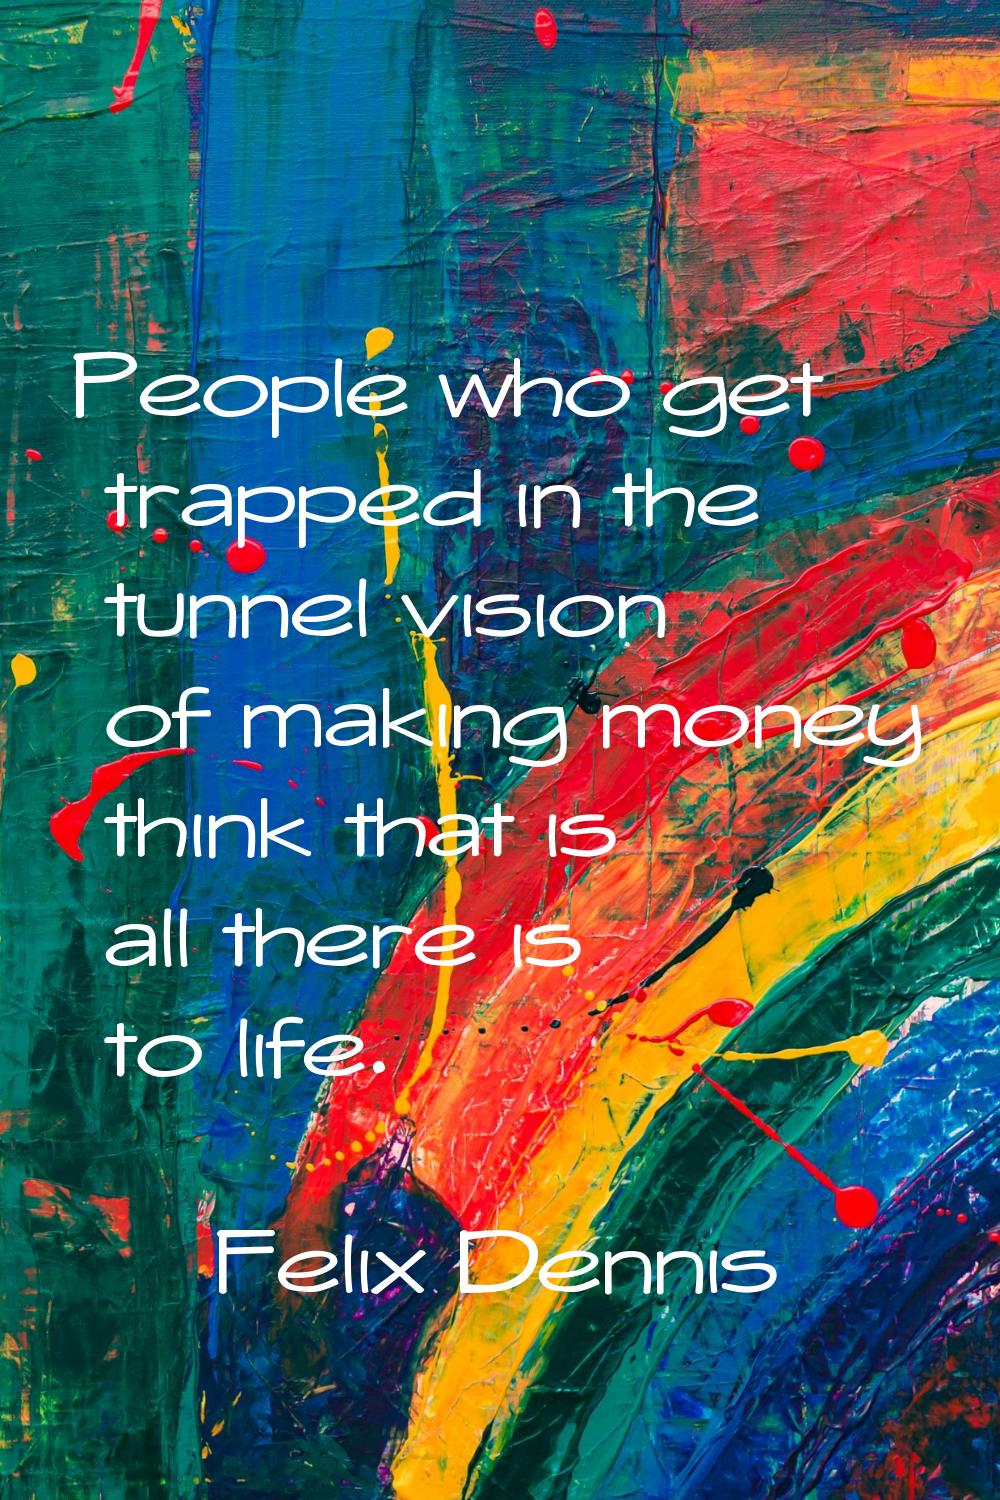 People who get trapped in the tunnel vision of making money think that is all there is to life.